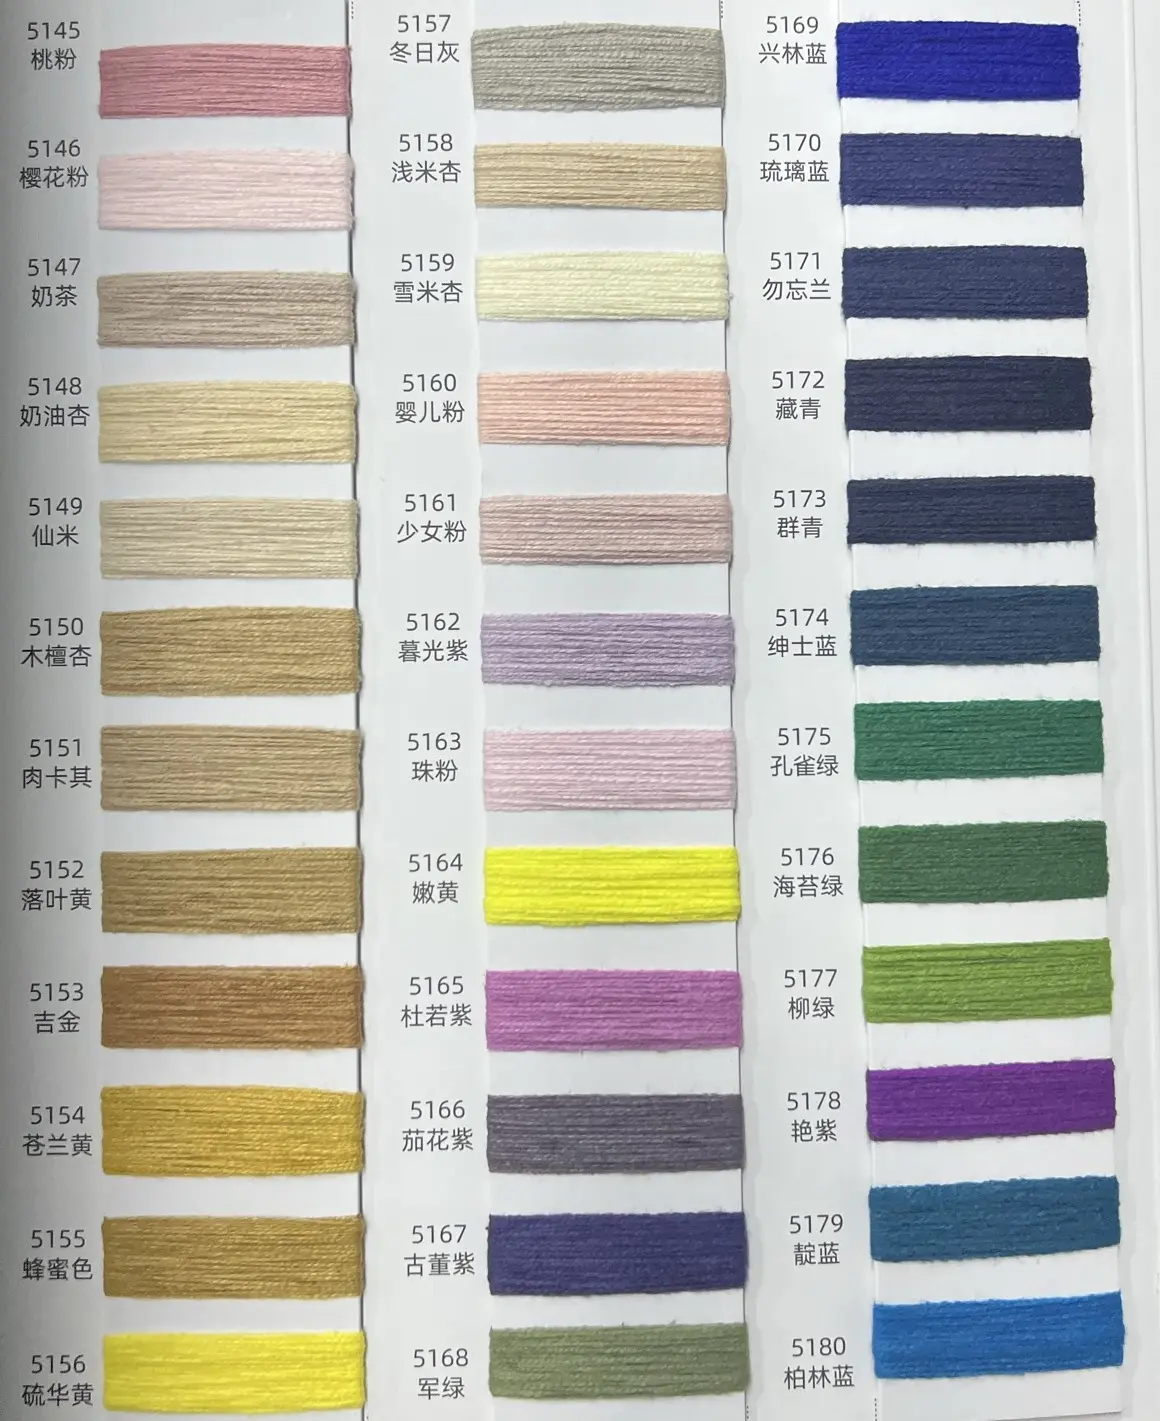 60%Cotton 40% Bulk Acrylic Fiber 16S/2 Dyed Yarn With More Than 200 Colours Ready Goods For You To Choose